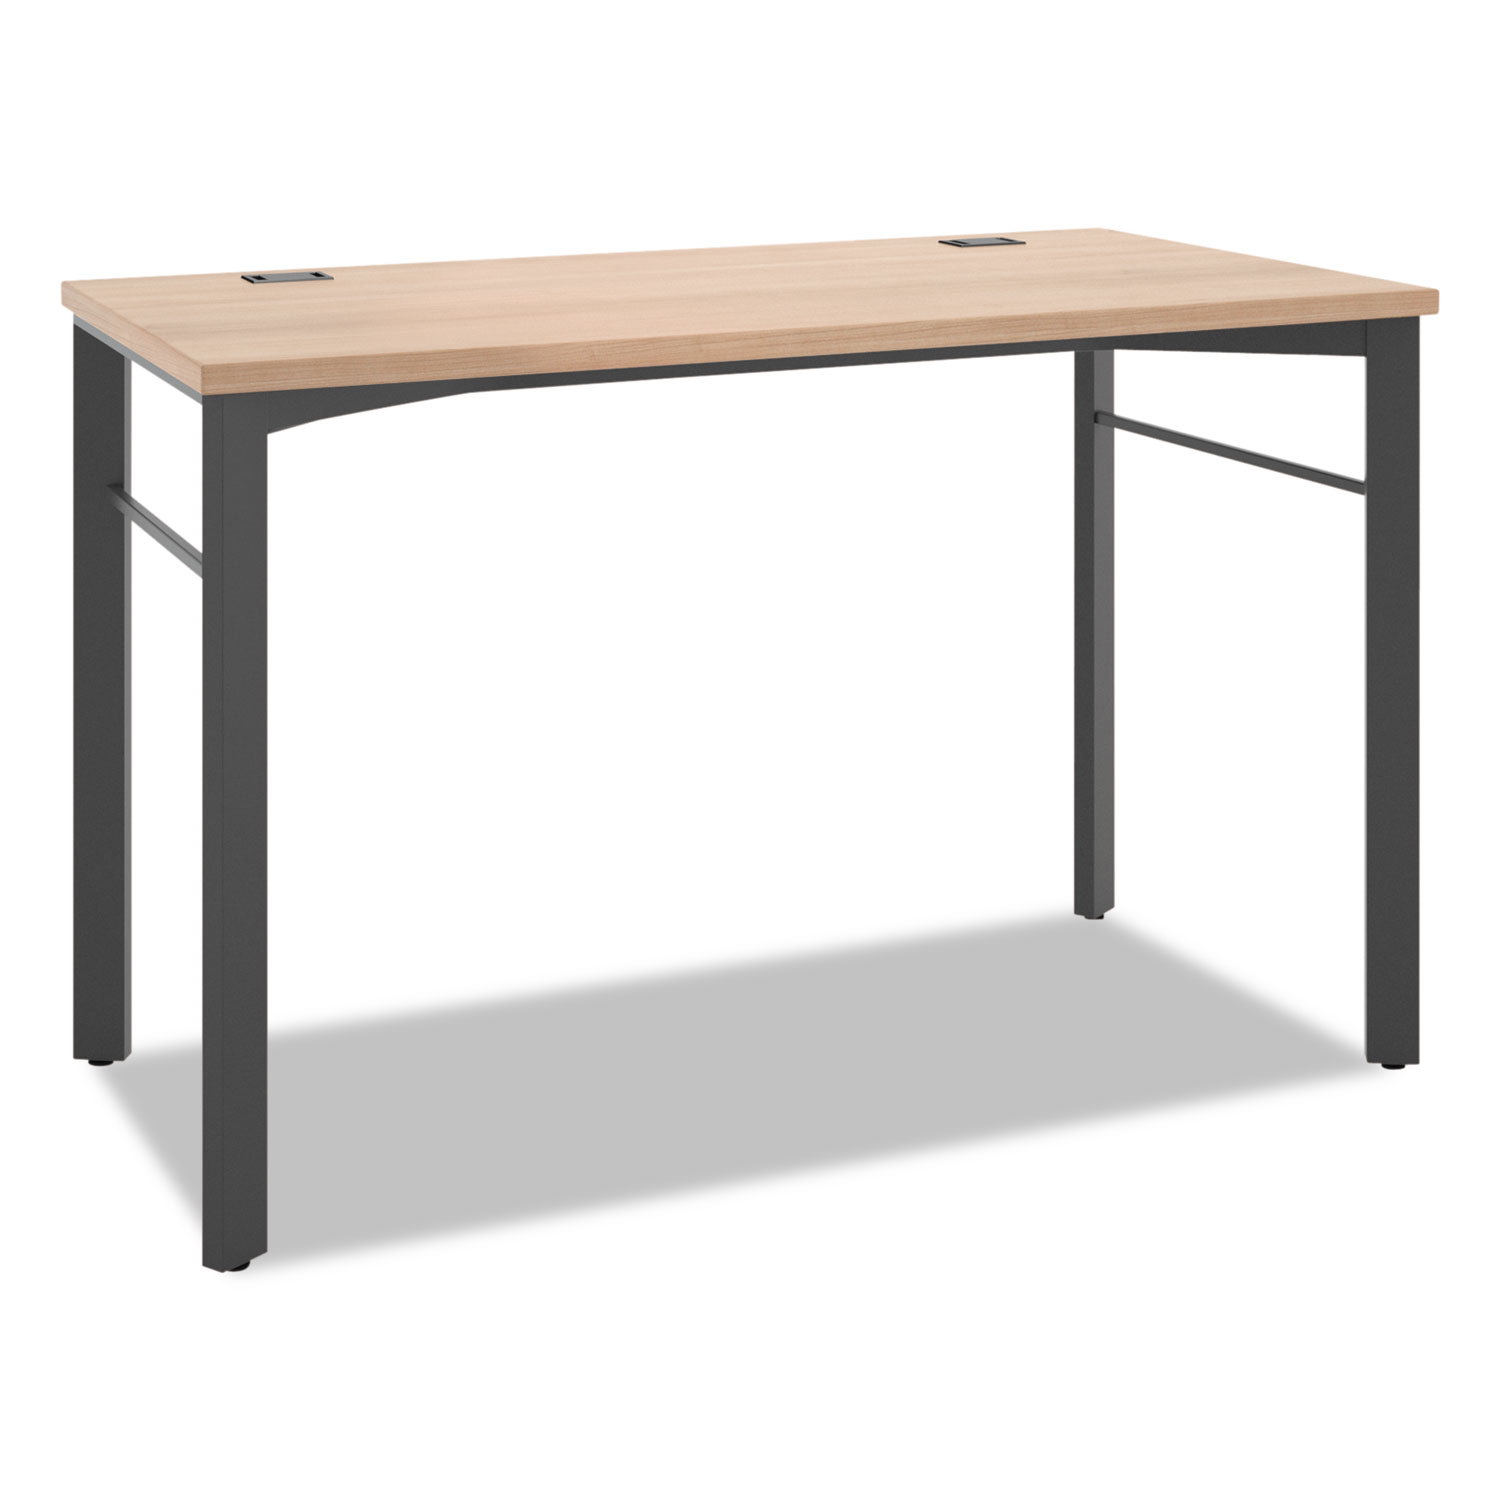  HON HMNG48WKSL.WH.A1 Manage Series Desk Table, 48w x 23.5d x 29.5h, Wheat (BSXMNG48WKSLW) 